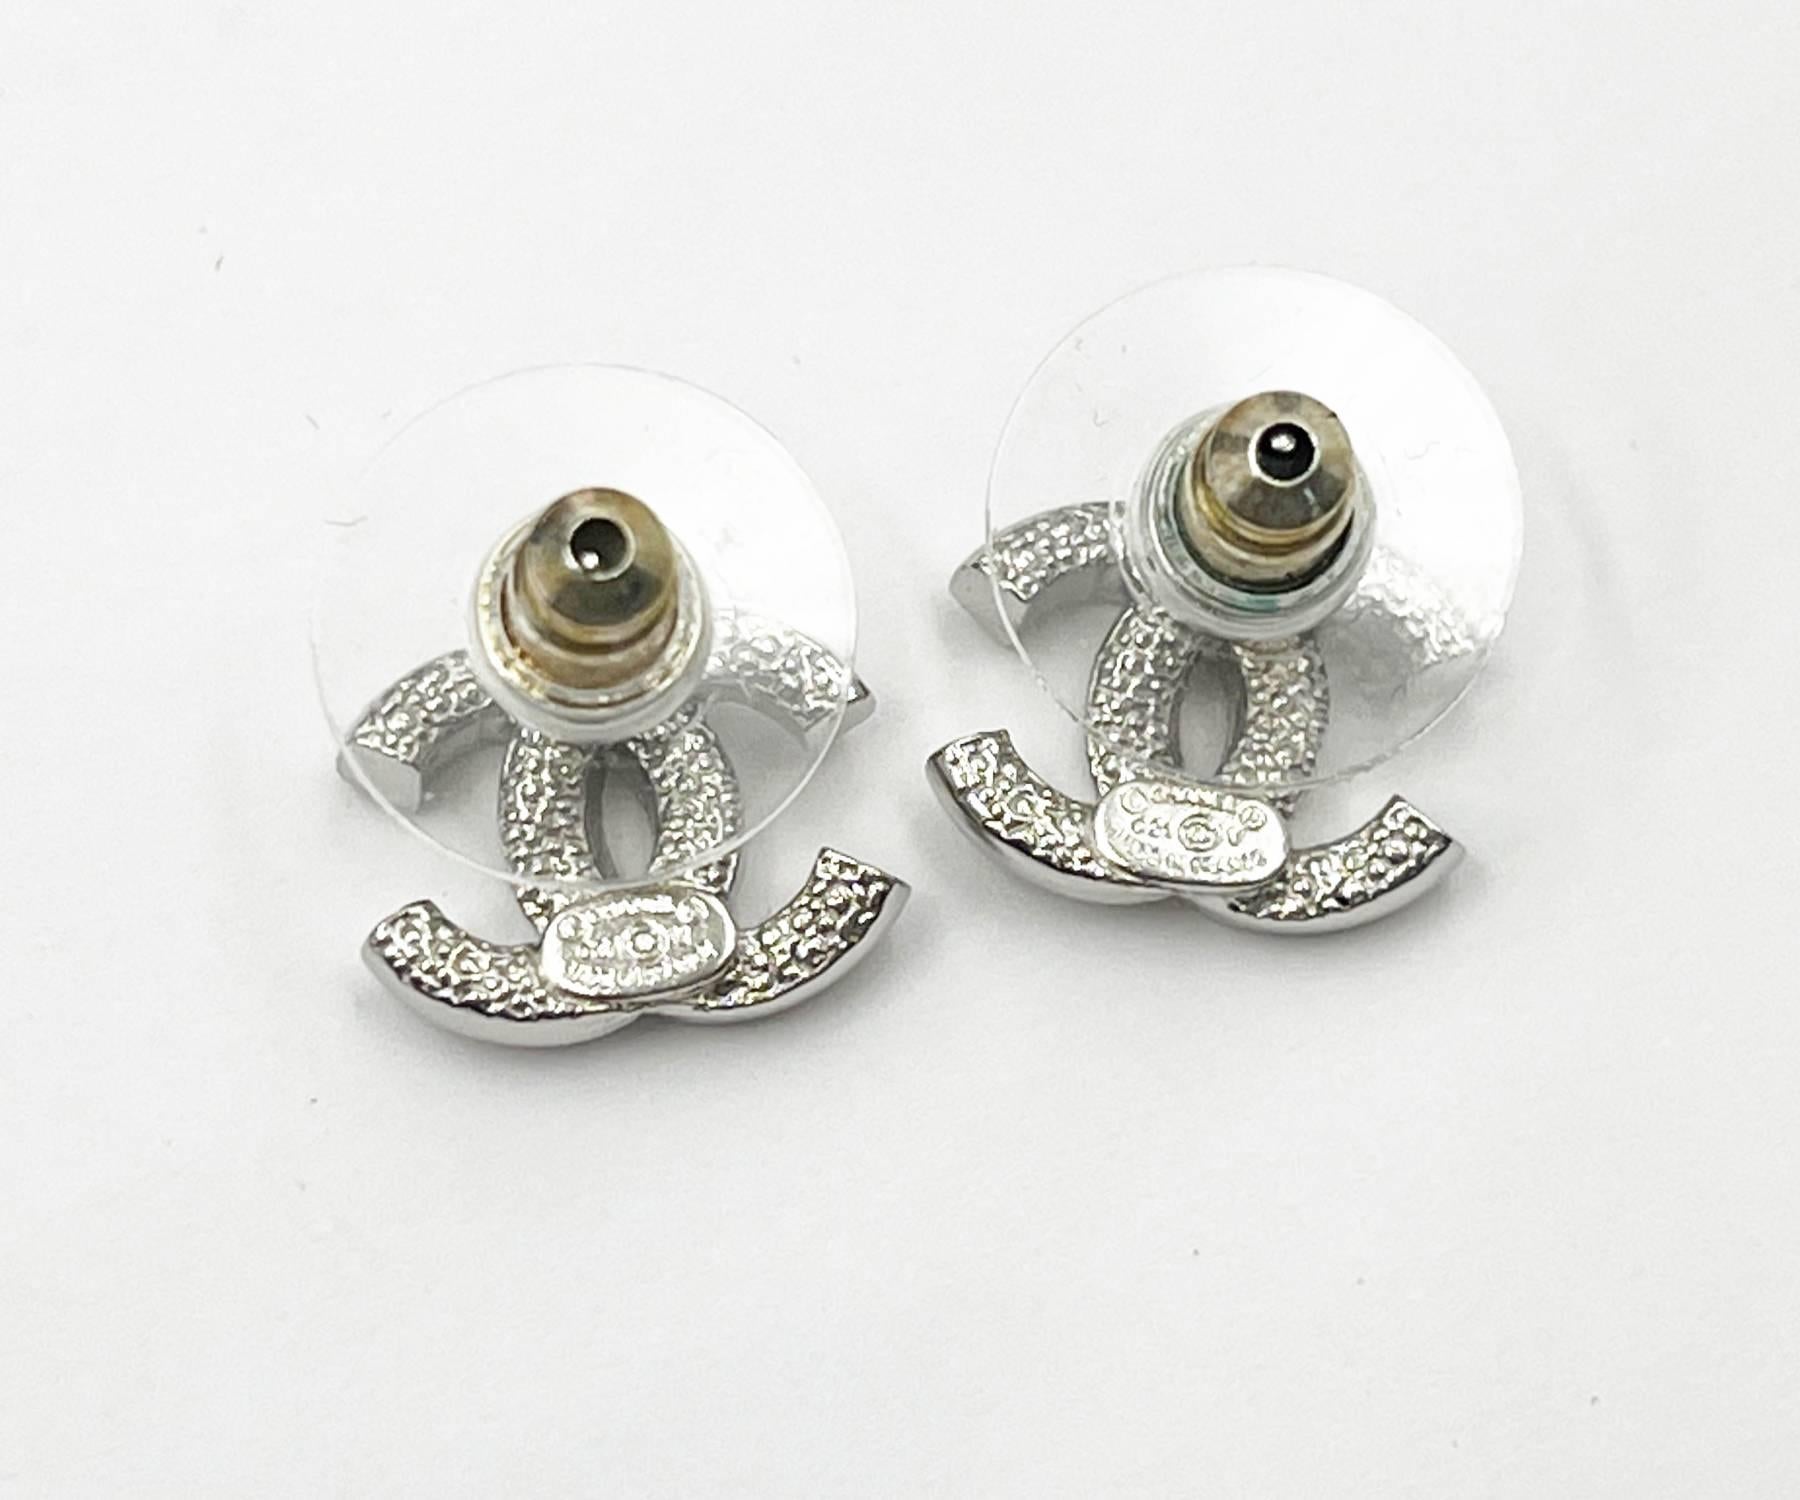 Chanel Brand New Classic Silver CC Crystal Reissued Piercing Earrings In Excellent Condition For Sale In Pasadena, CA